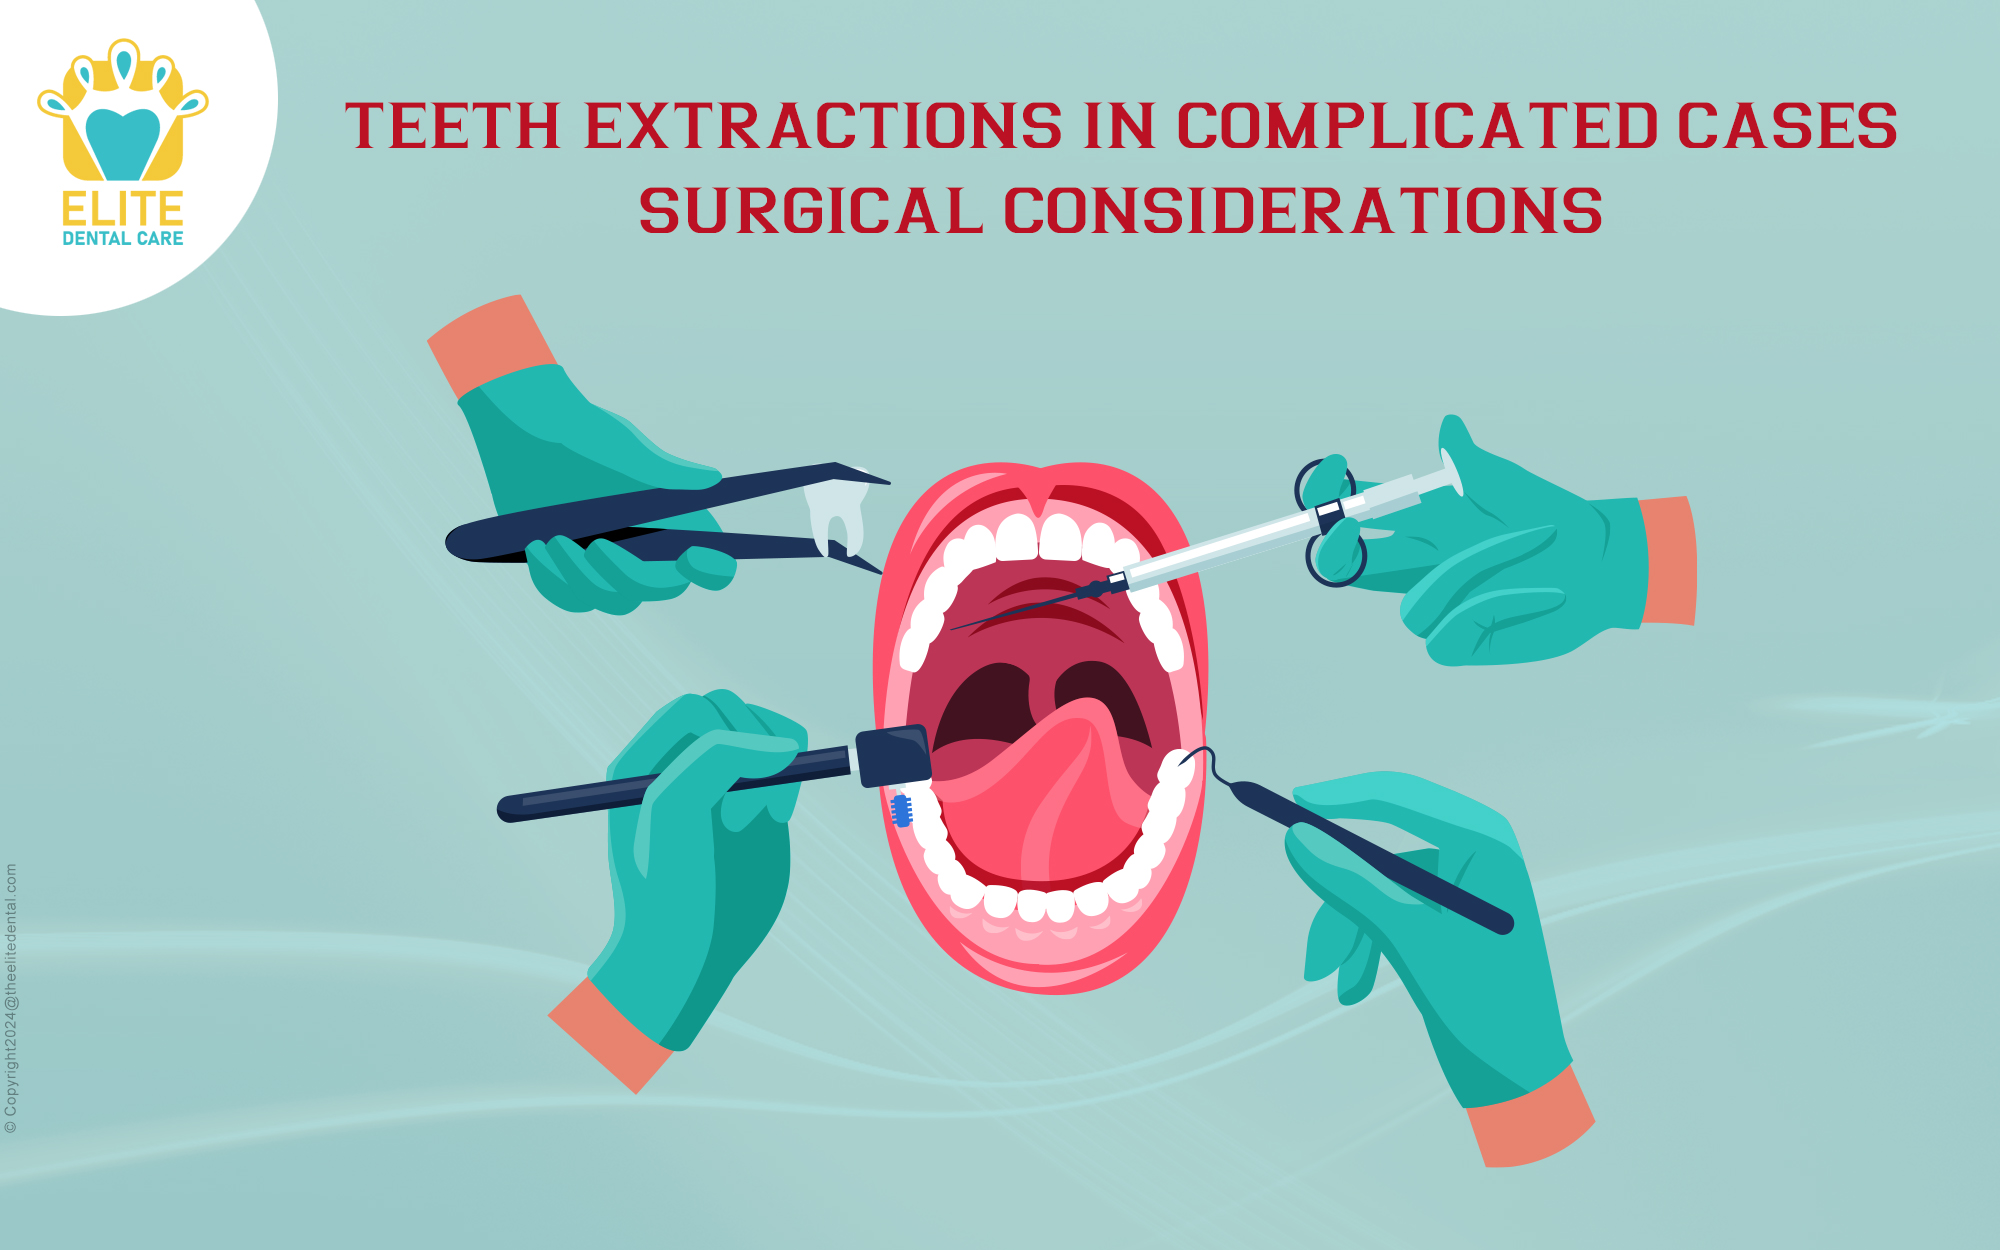 Teeth-Extractions-in-Complicated-Cases-Surgical-Considerations